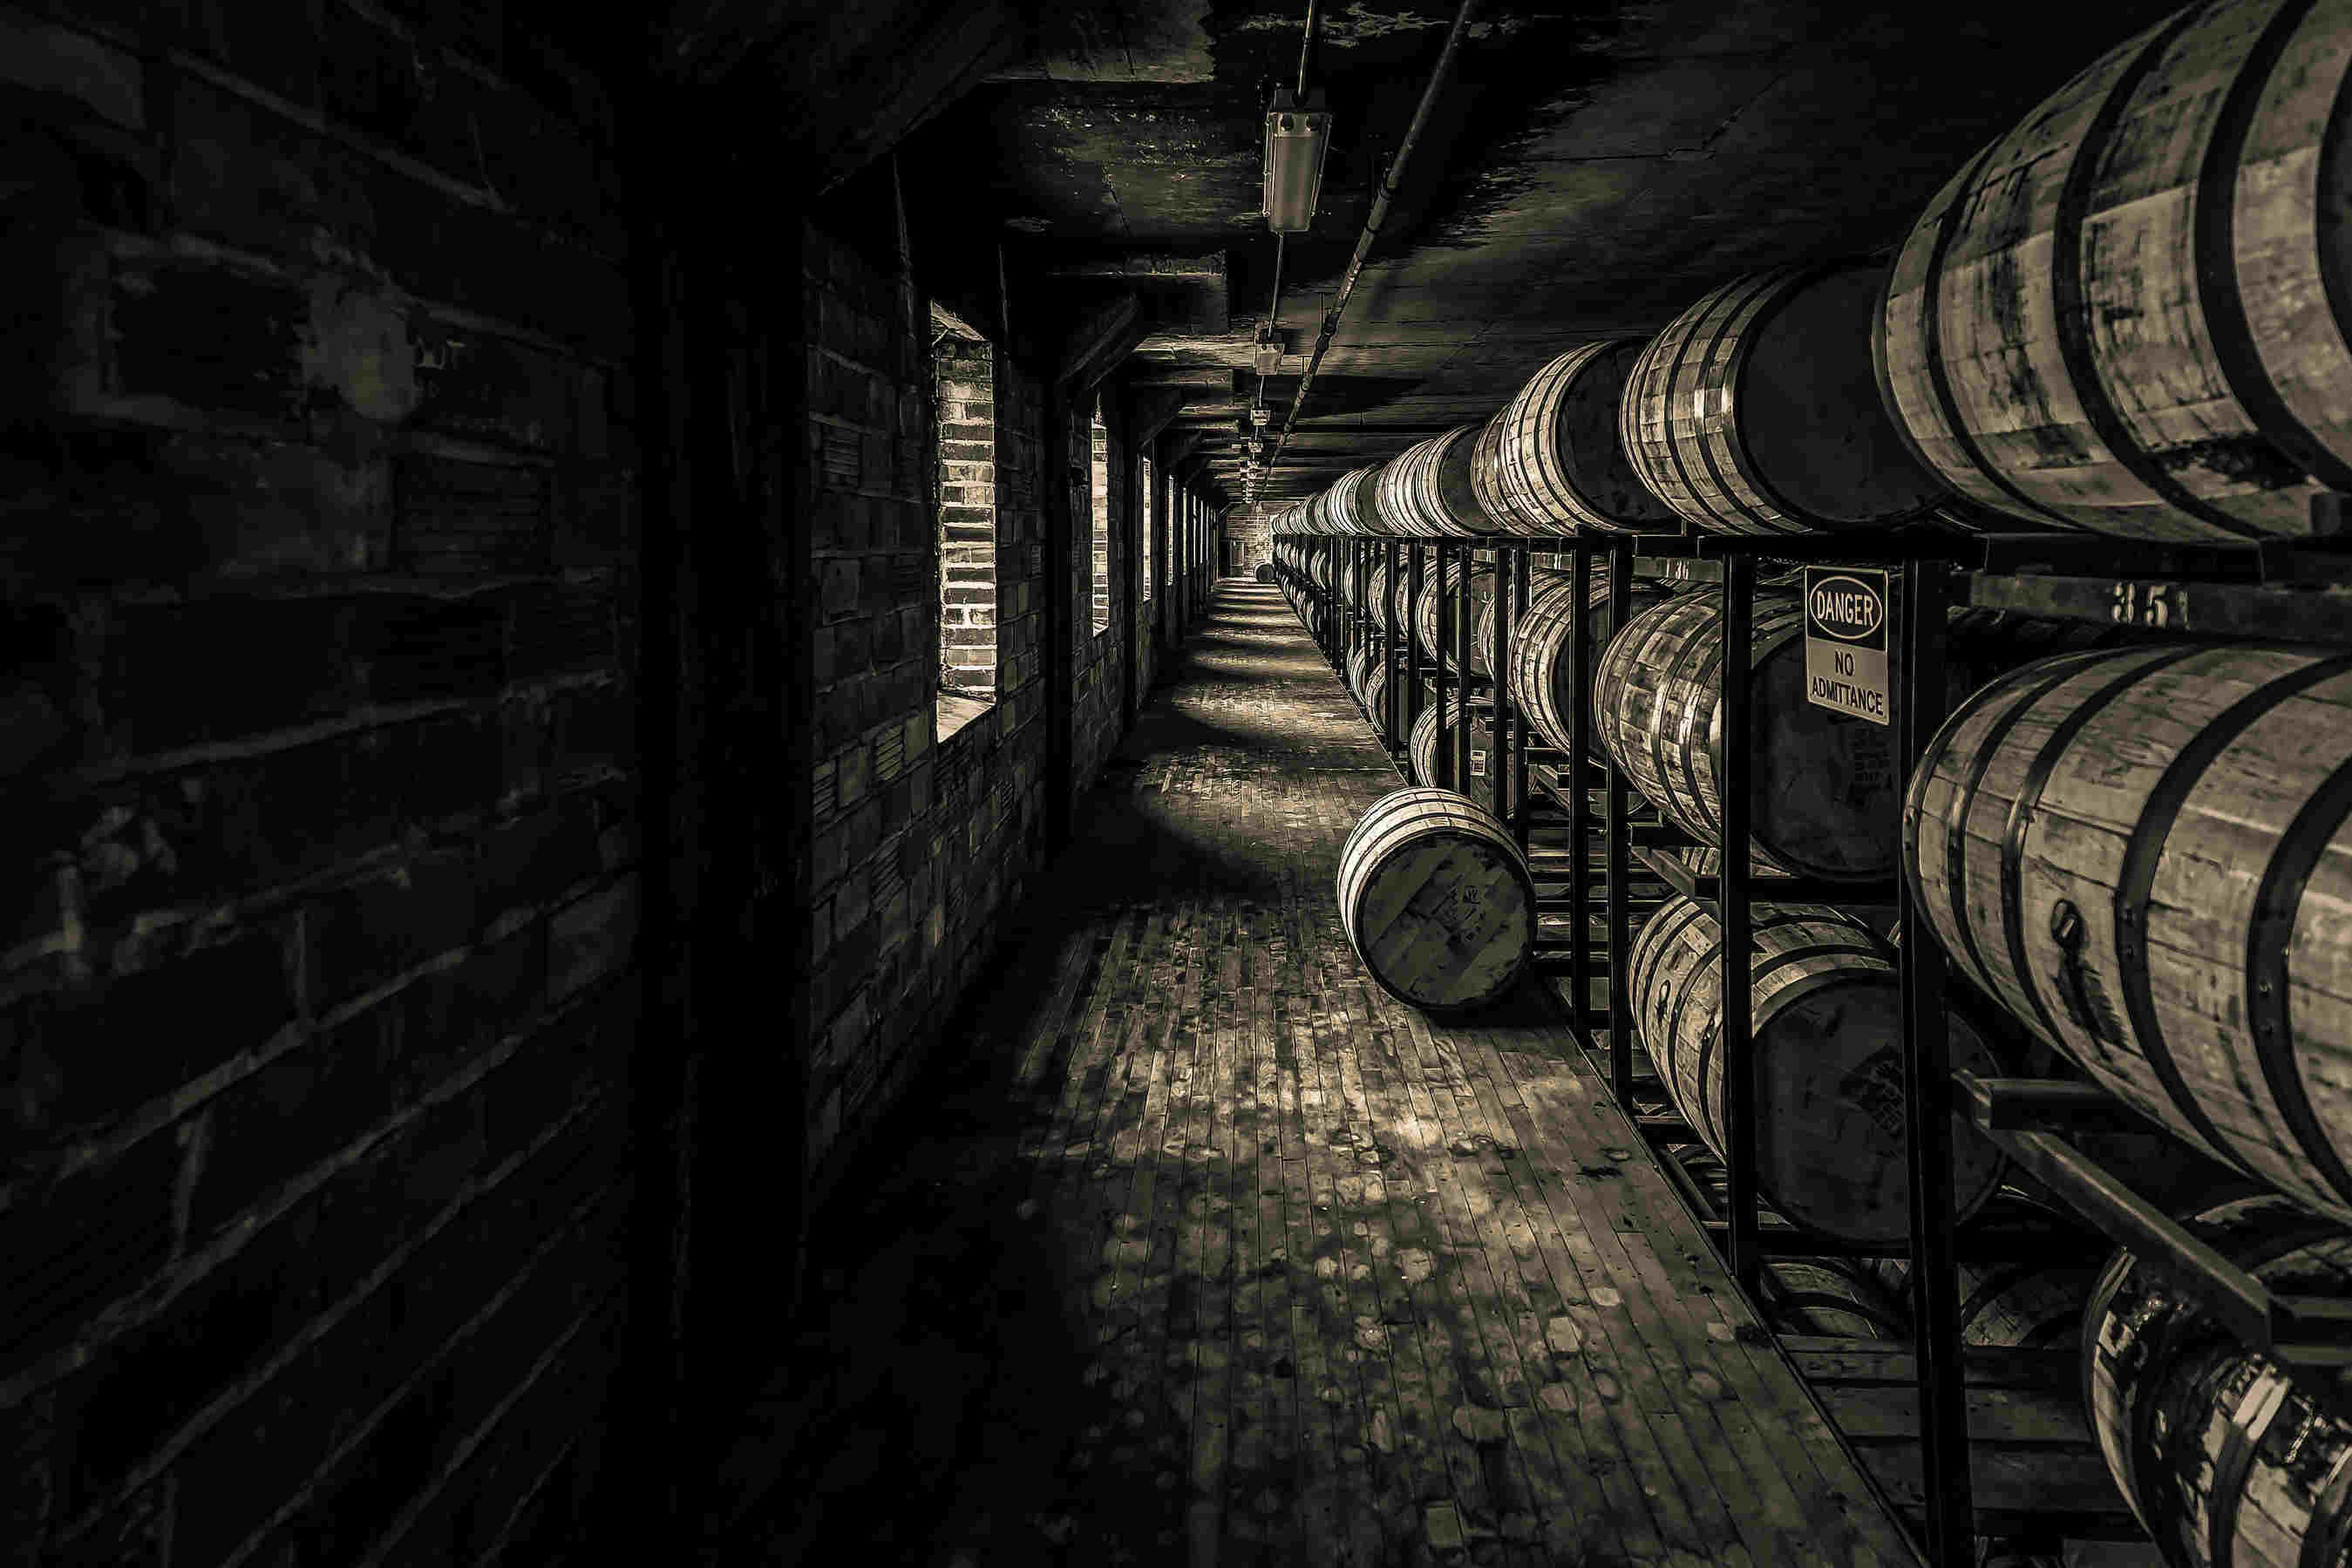 The Kentucky State tax law regards aging barrels of Bourbon as "property" and as such subject to property tax. “Every year that a barrel ages, it's taxed again and again and again.”